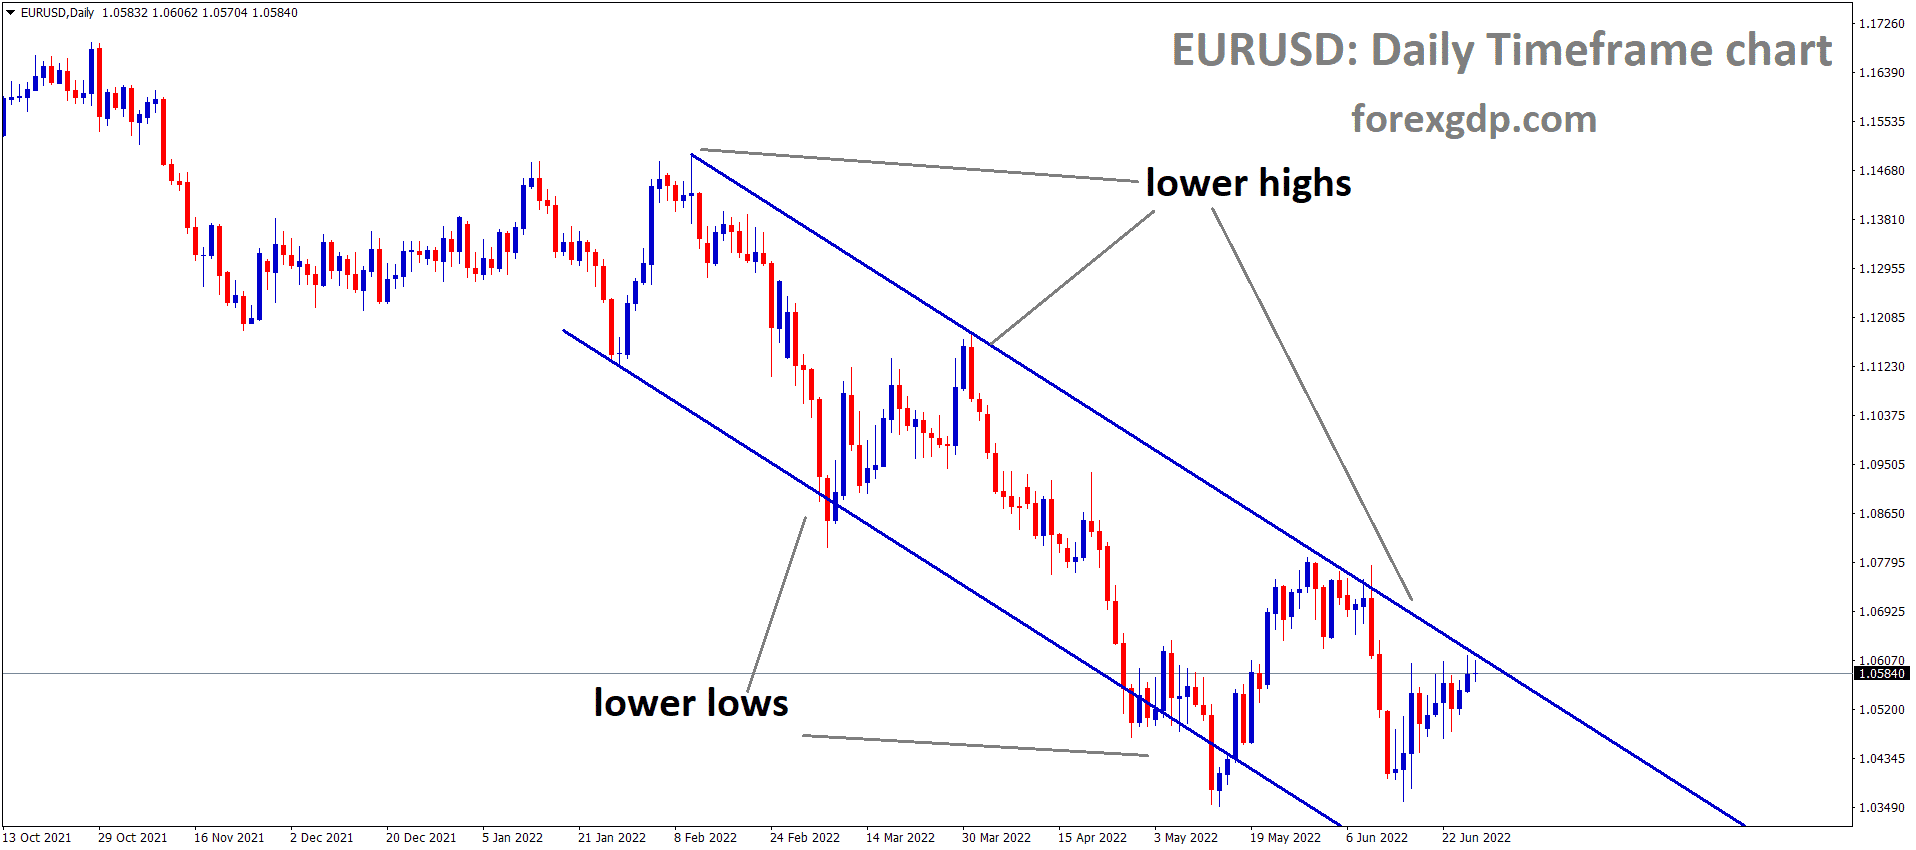 EURUSD is moving in the Descending channel and the Market has reached the Lower high area of the channel 1